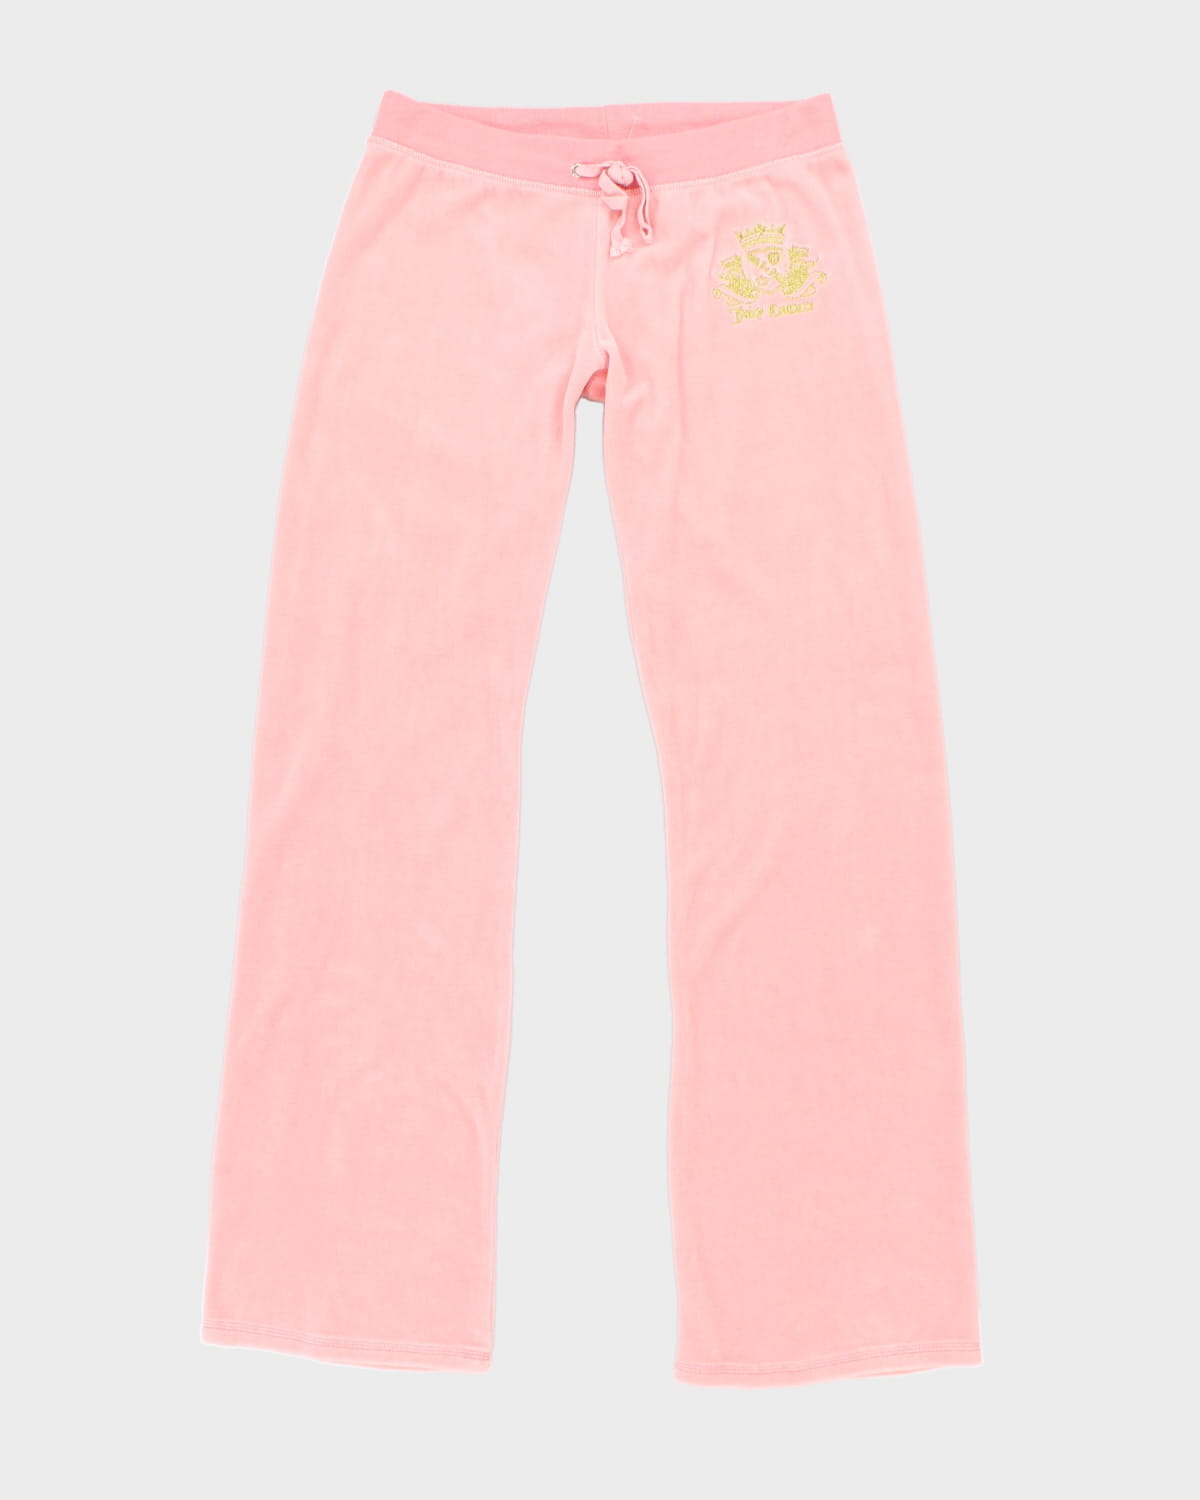 Y2K 00s Juicy Couture Pink Velour Tracksuit Bottoms - W34 L34